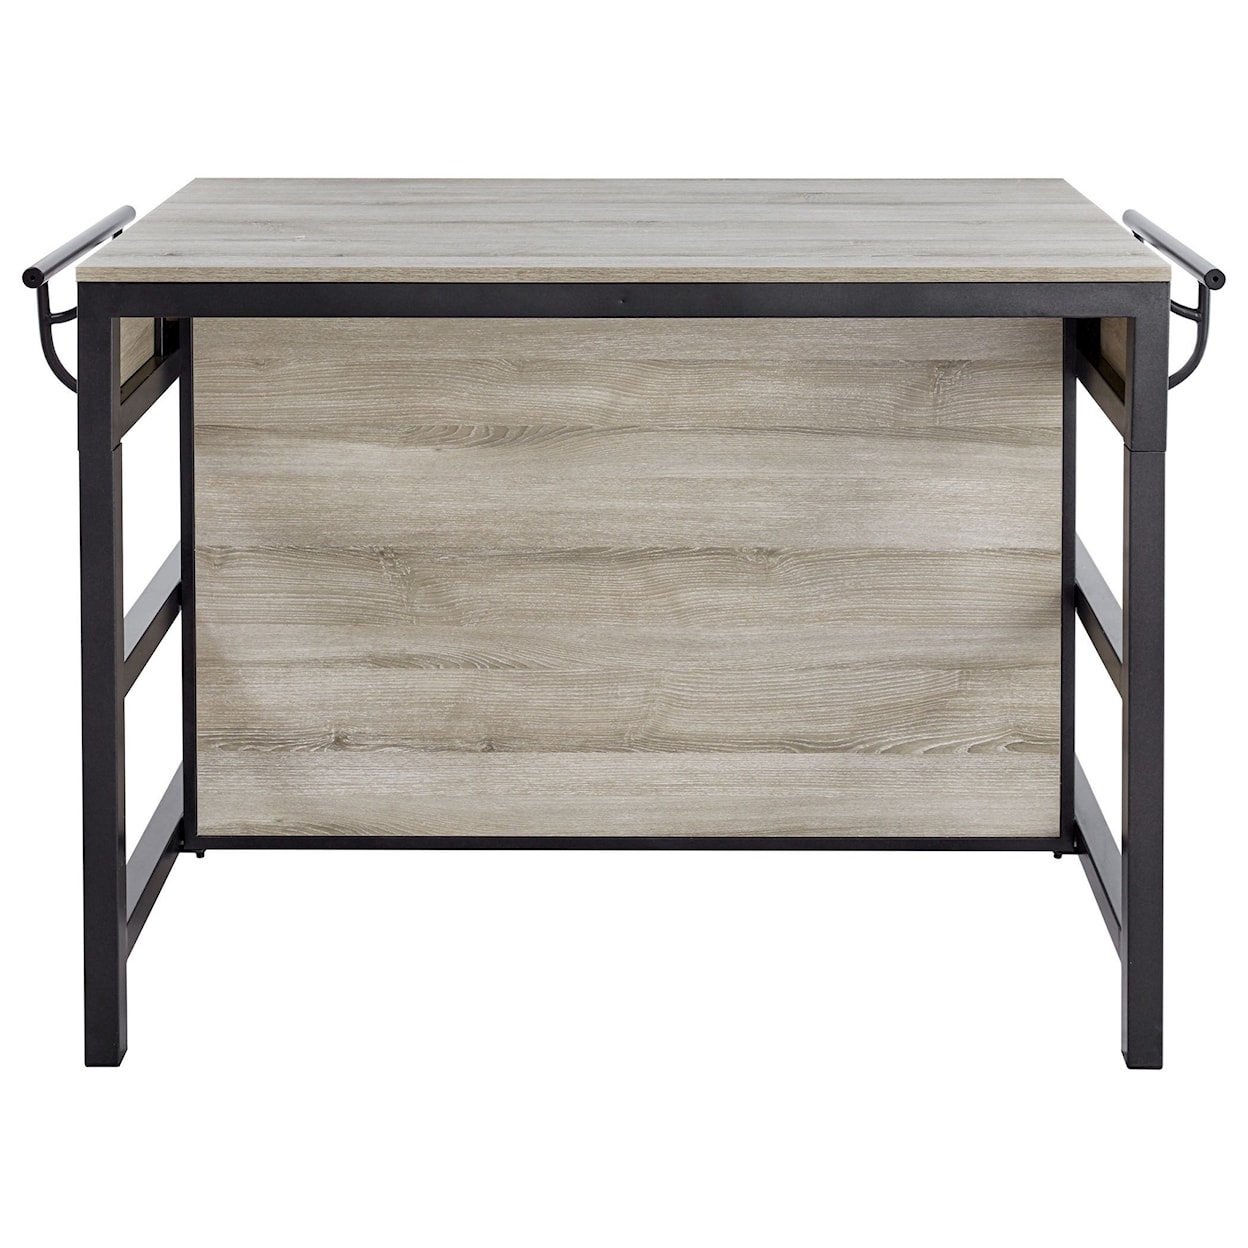 Steve Silver Carson Counter Height Kitchen Table